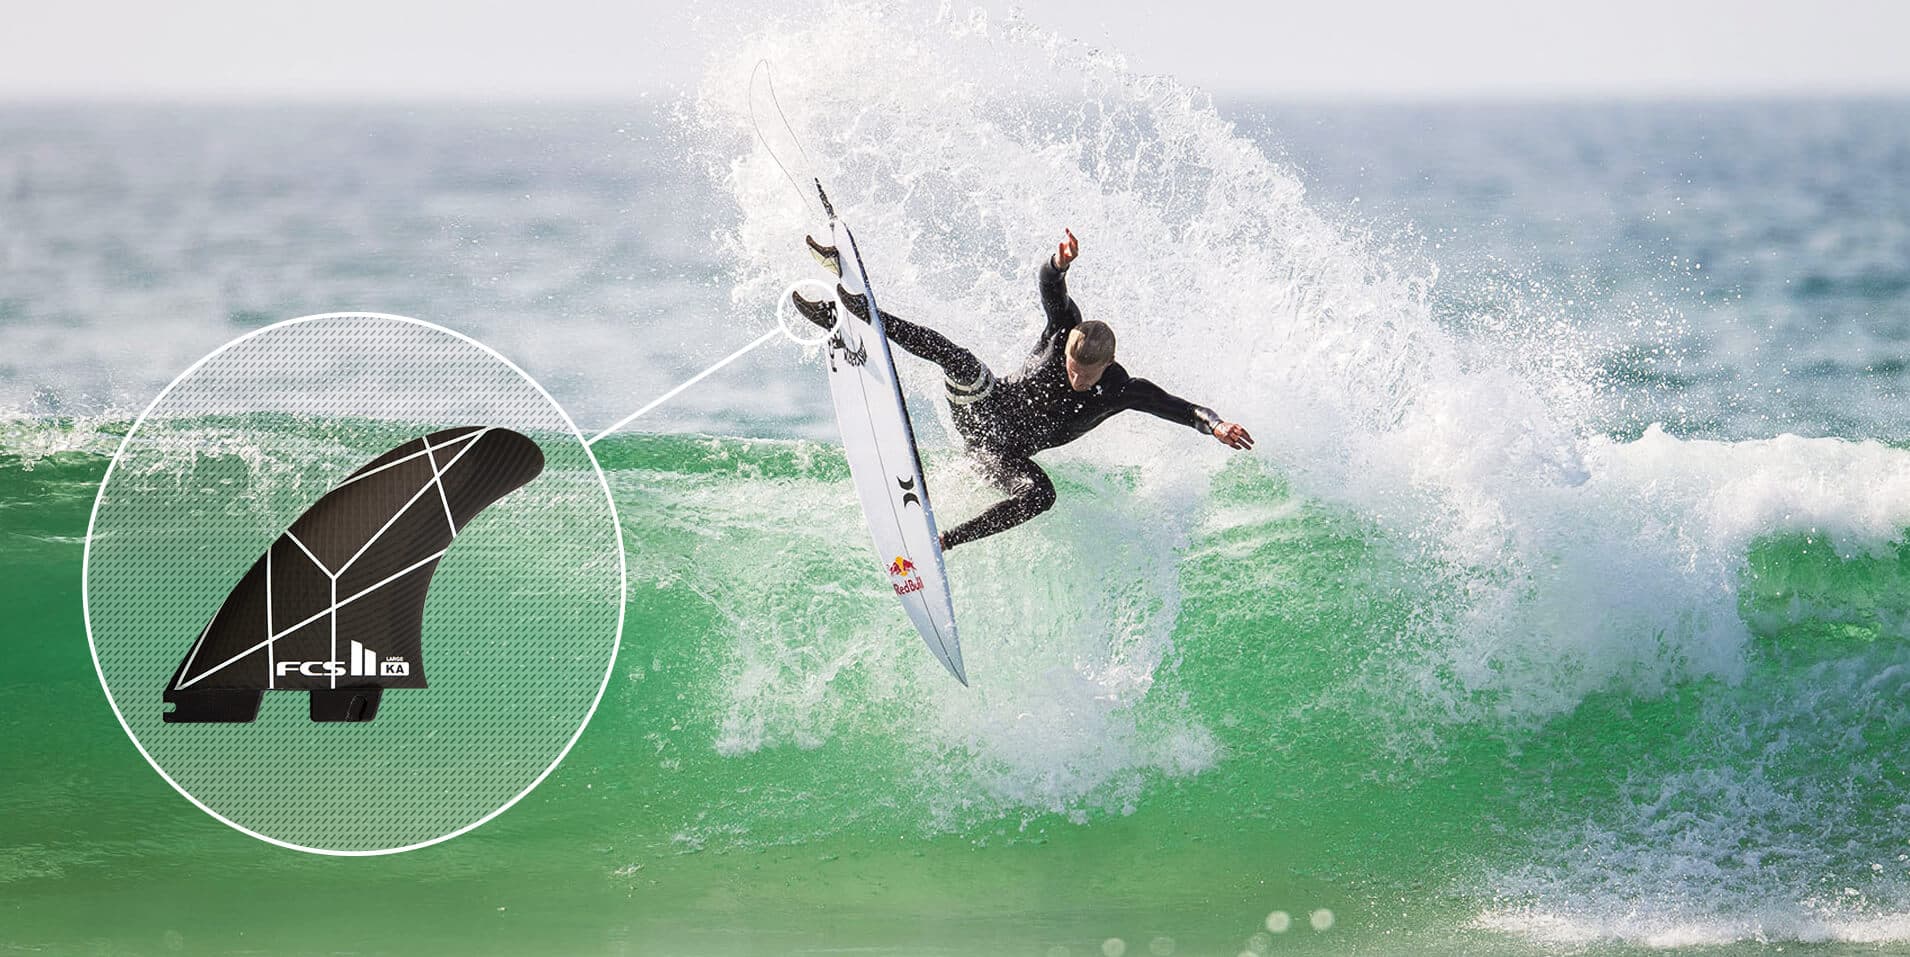 Kolohe Andino getting air with signature fcs ii surfboard fins